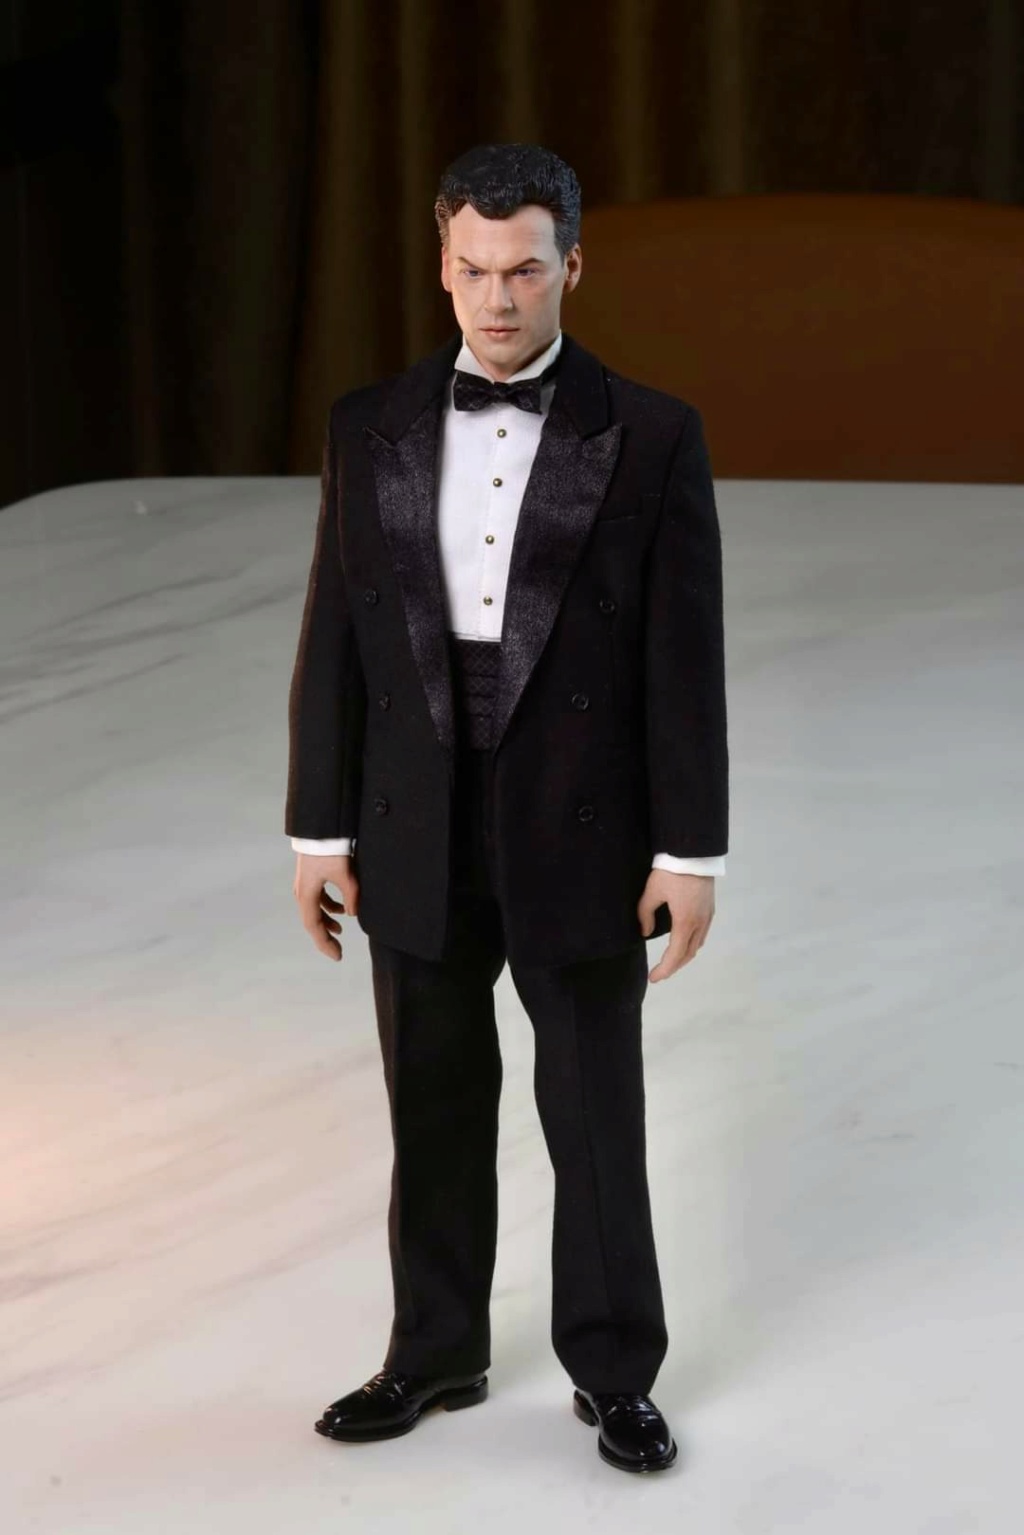 NEW PRODUCT: Mars Toys: MAT012 1/6 Scale Mr. W figure Img_6116